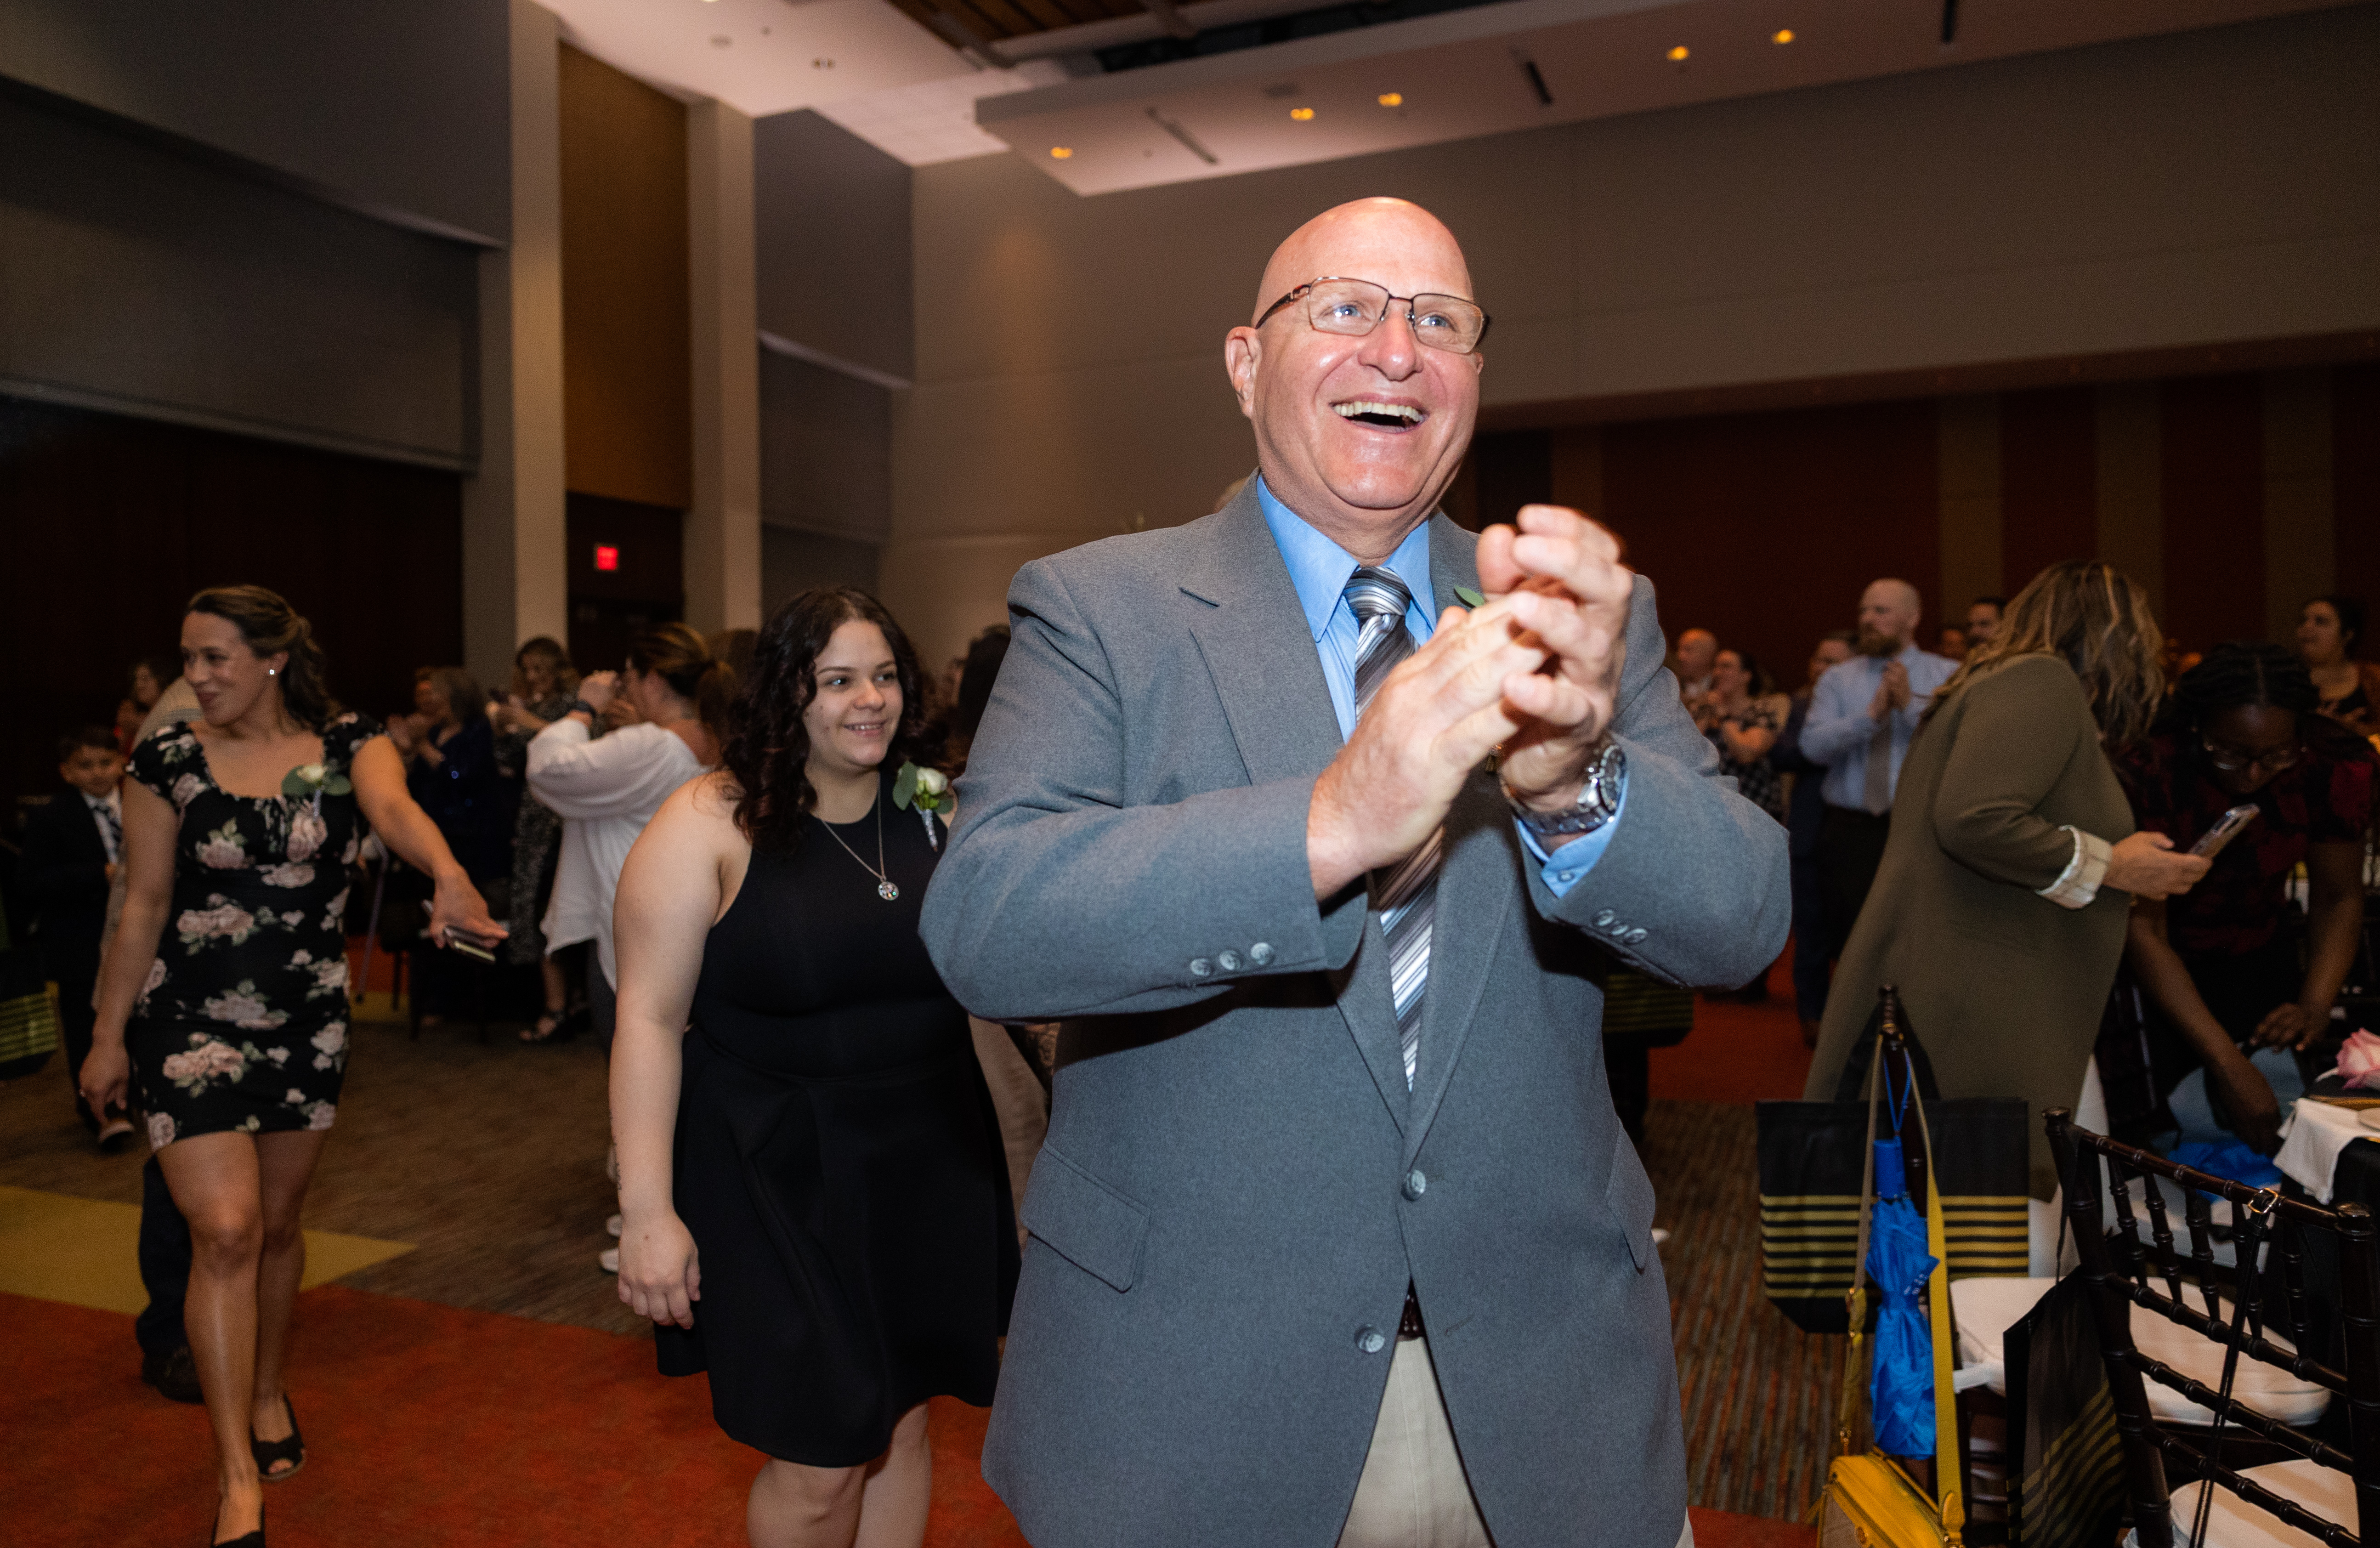 Finalist Steve Ferraro, of The Big E, all smiles while walking to the stage at the 25th annual Howdy Awards for Hospitality Excellence held at the MassMutual Center Monday evening, May 16, 2022. (Hoang ‘Leon’ Nguyen / The Republican)